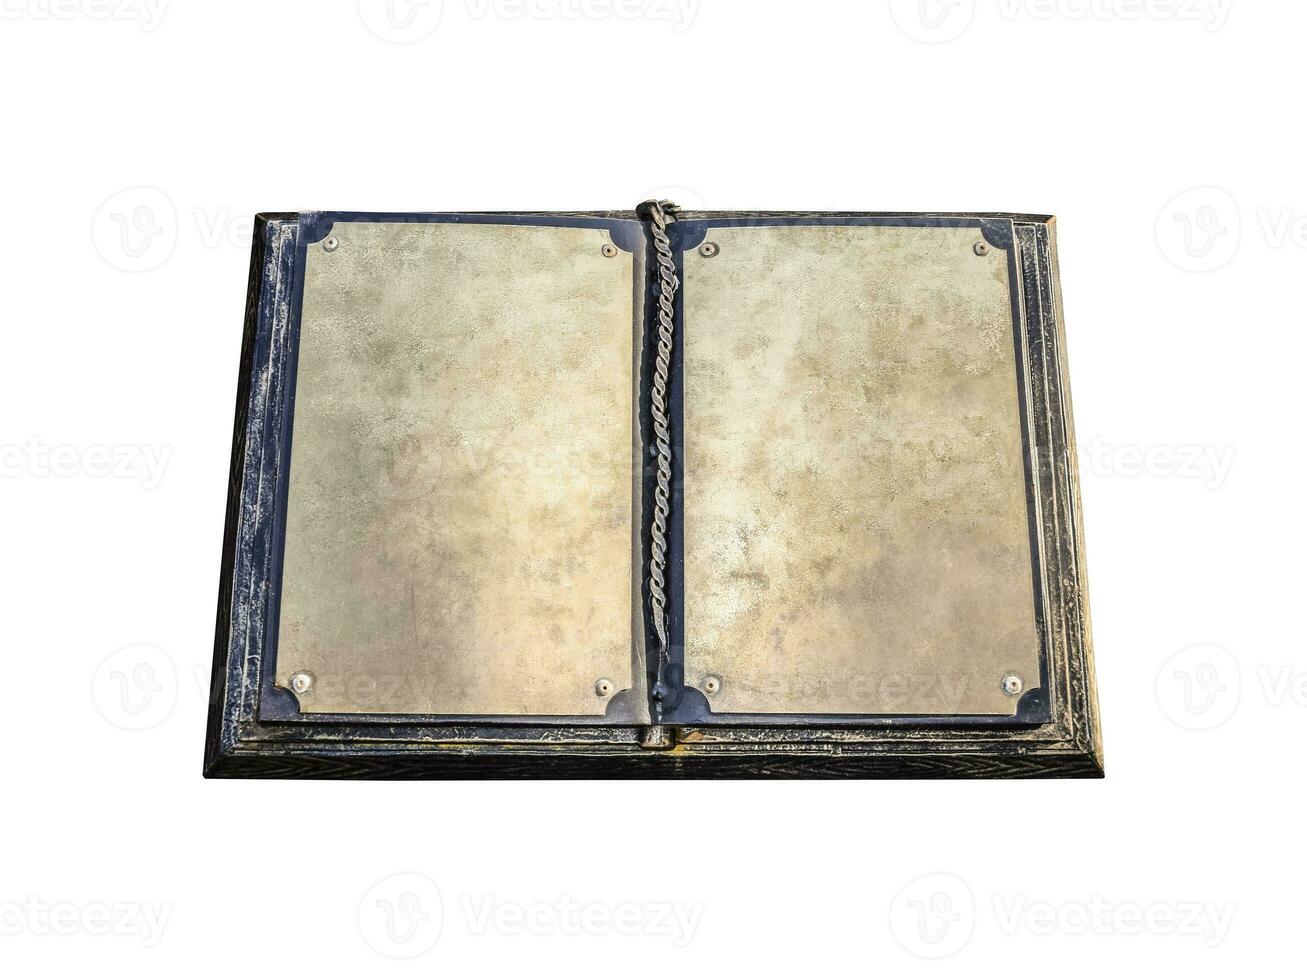 An old metal book. Blank pages of an old book photo